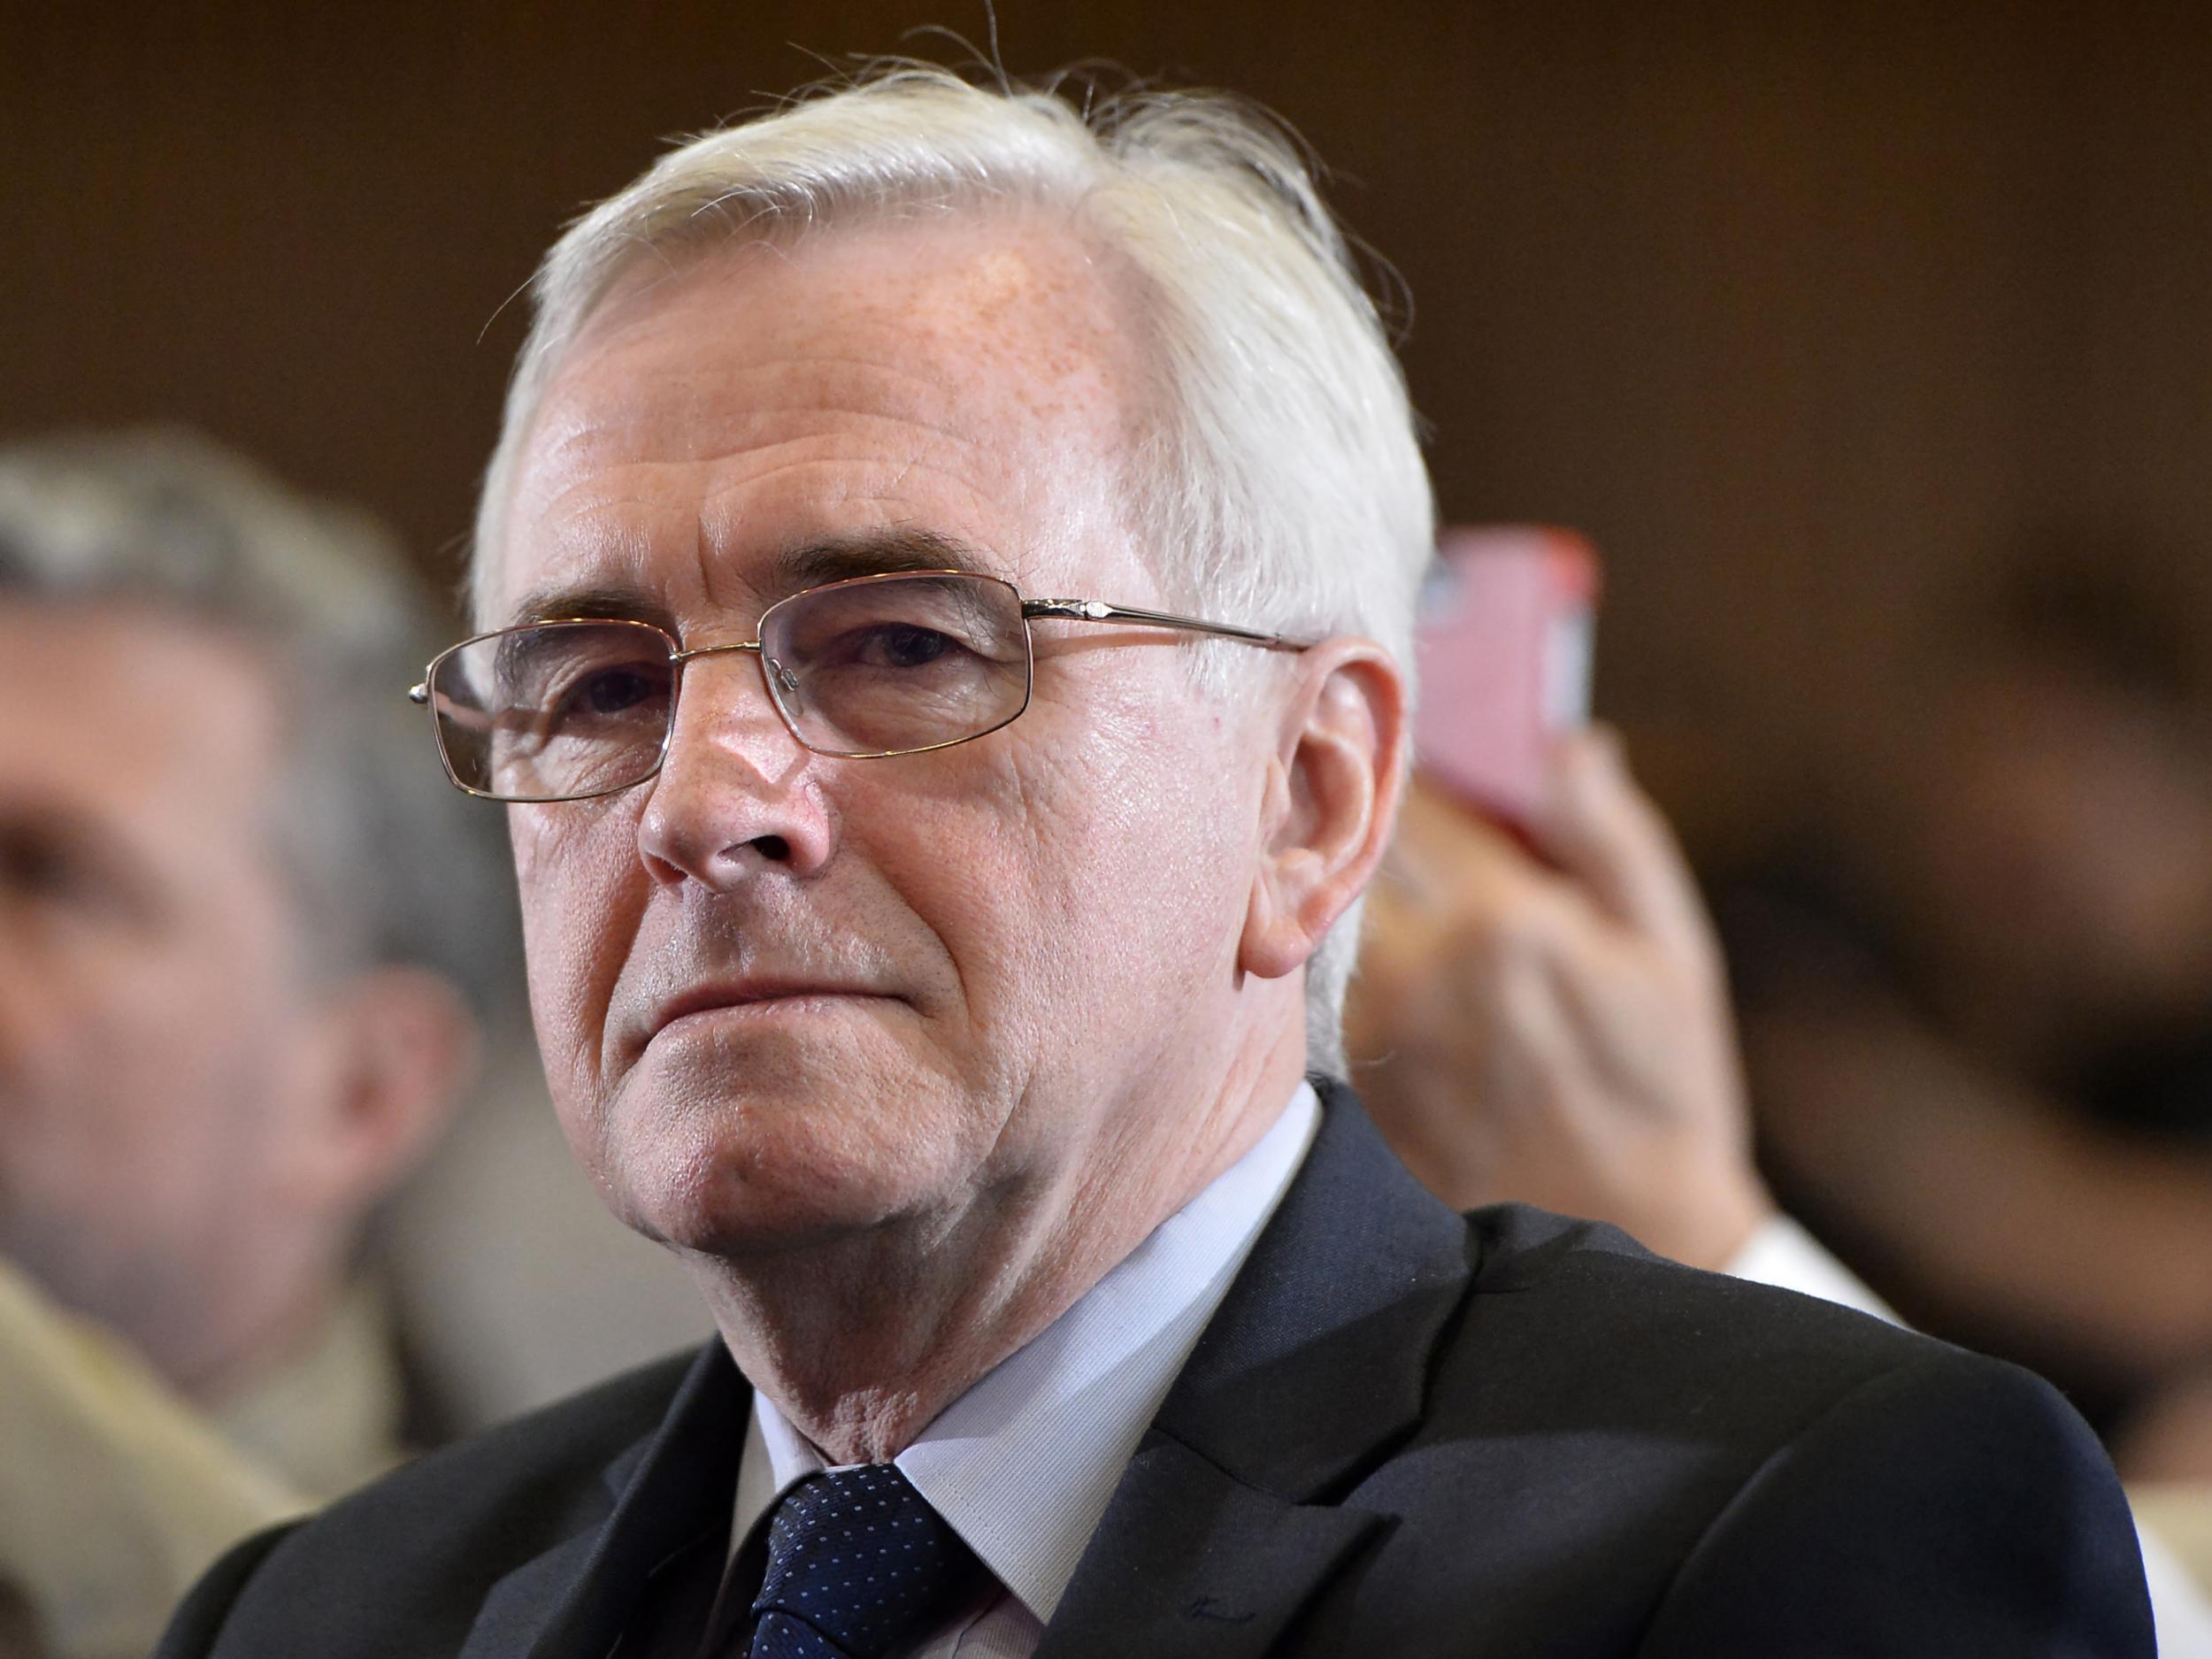 Shadow Chancellor John McDonnell says there is a 'growing consensus' against neoliberalism